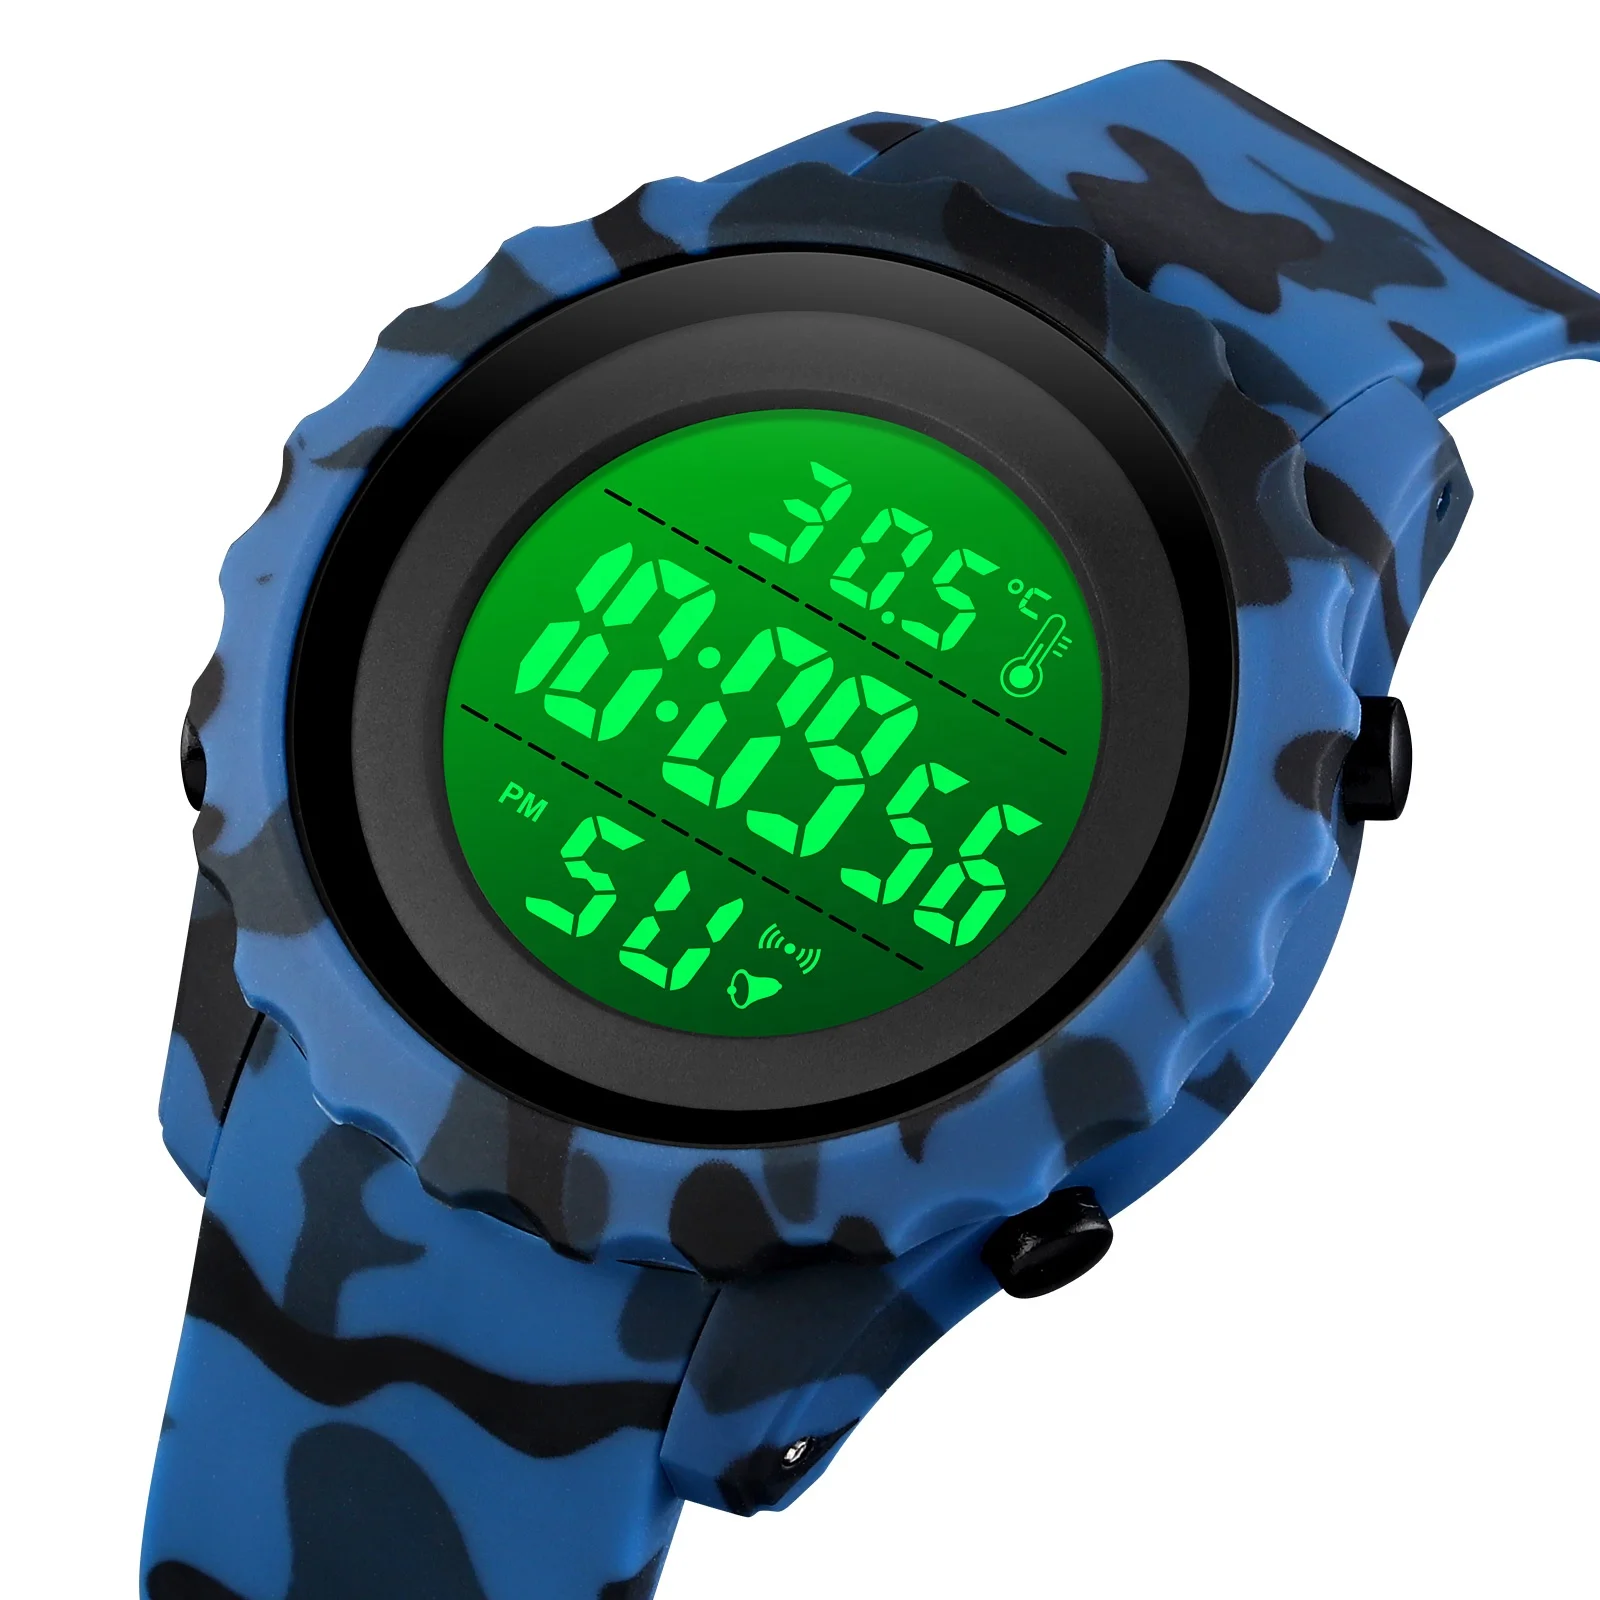 

Famous Brand SKMEI 1745 LED Display Men's Sports Watches Digital WristWatch Military Waterproof Temperature Watch, Black/white,camo blue/white,camo green/white,camo grey/white and so on